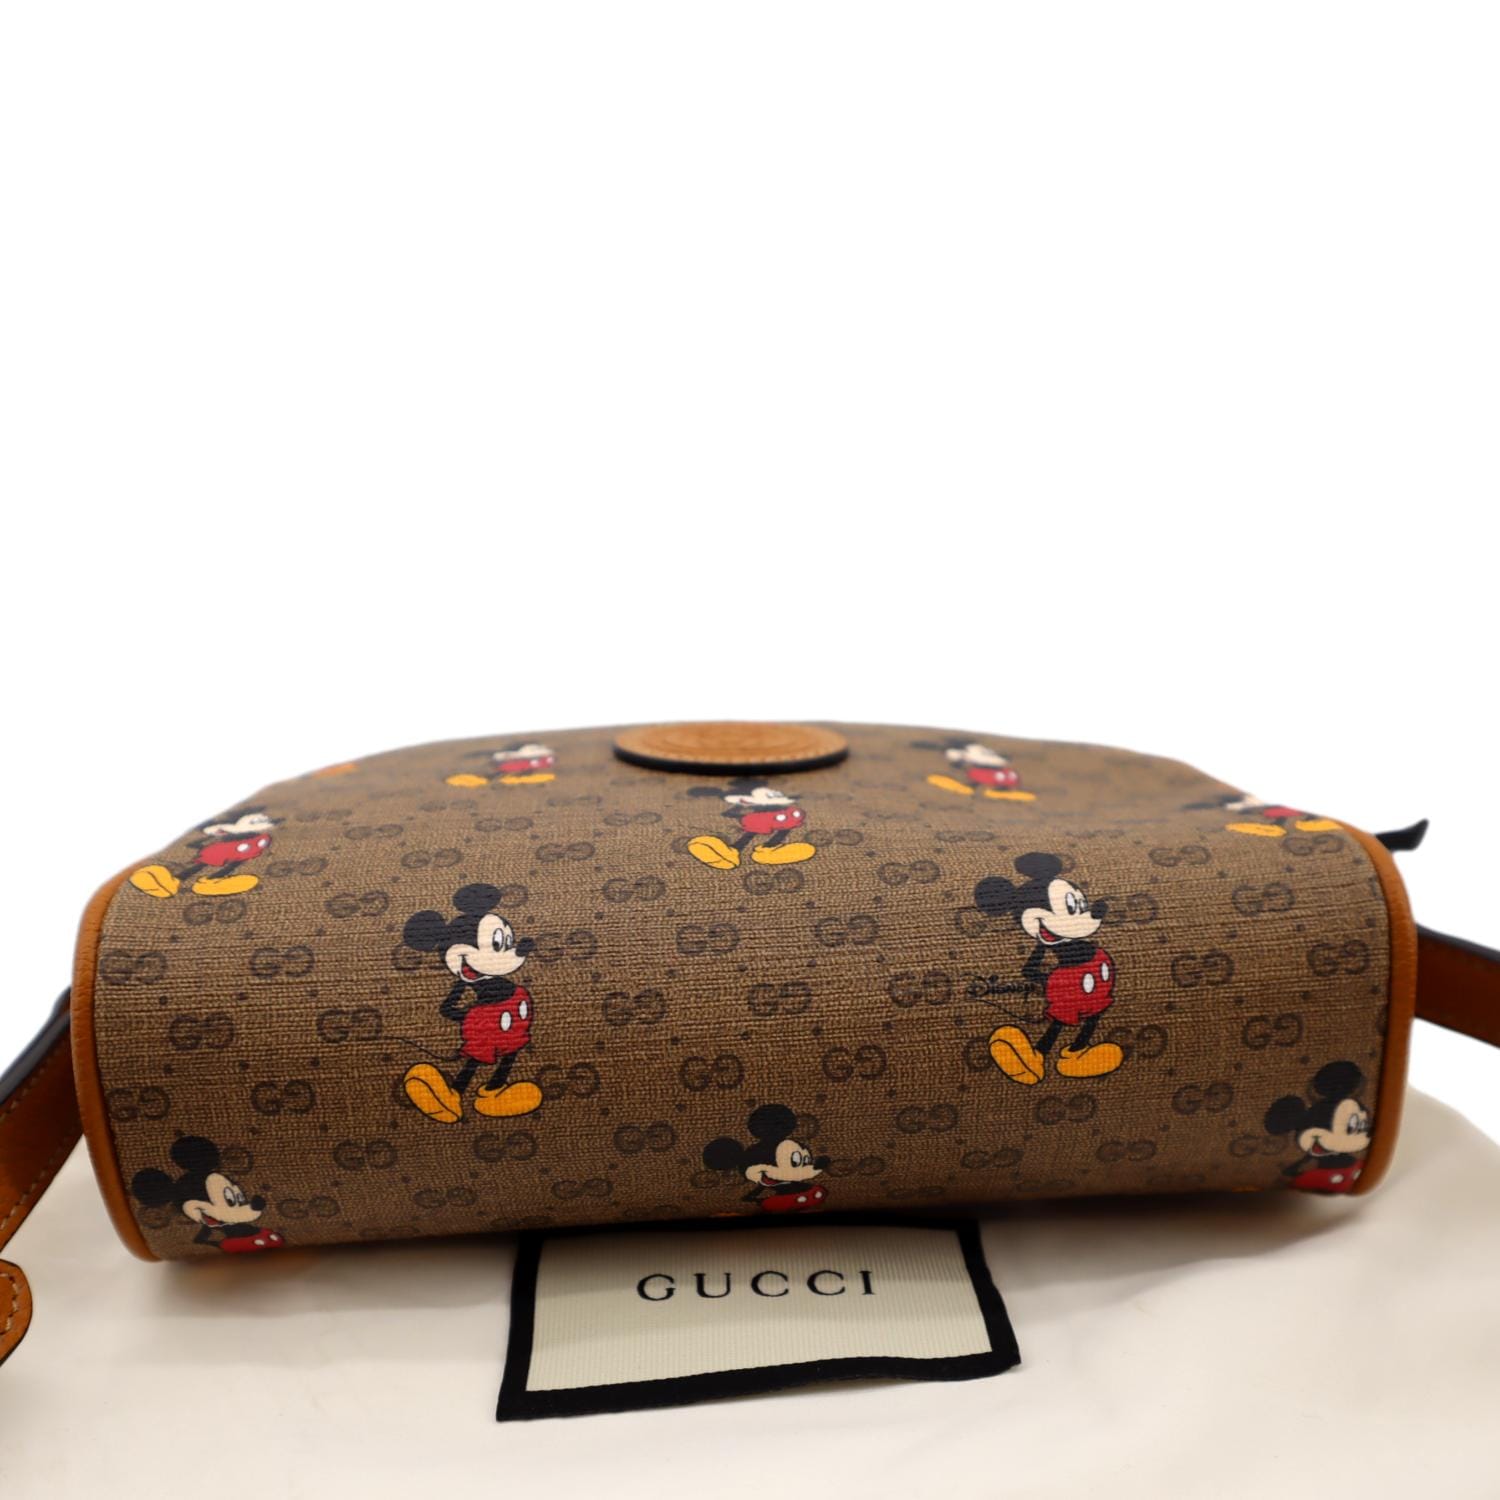 NEW Gucci Mickey Mouse Supreme Bomber Jacket - Usalast